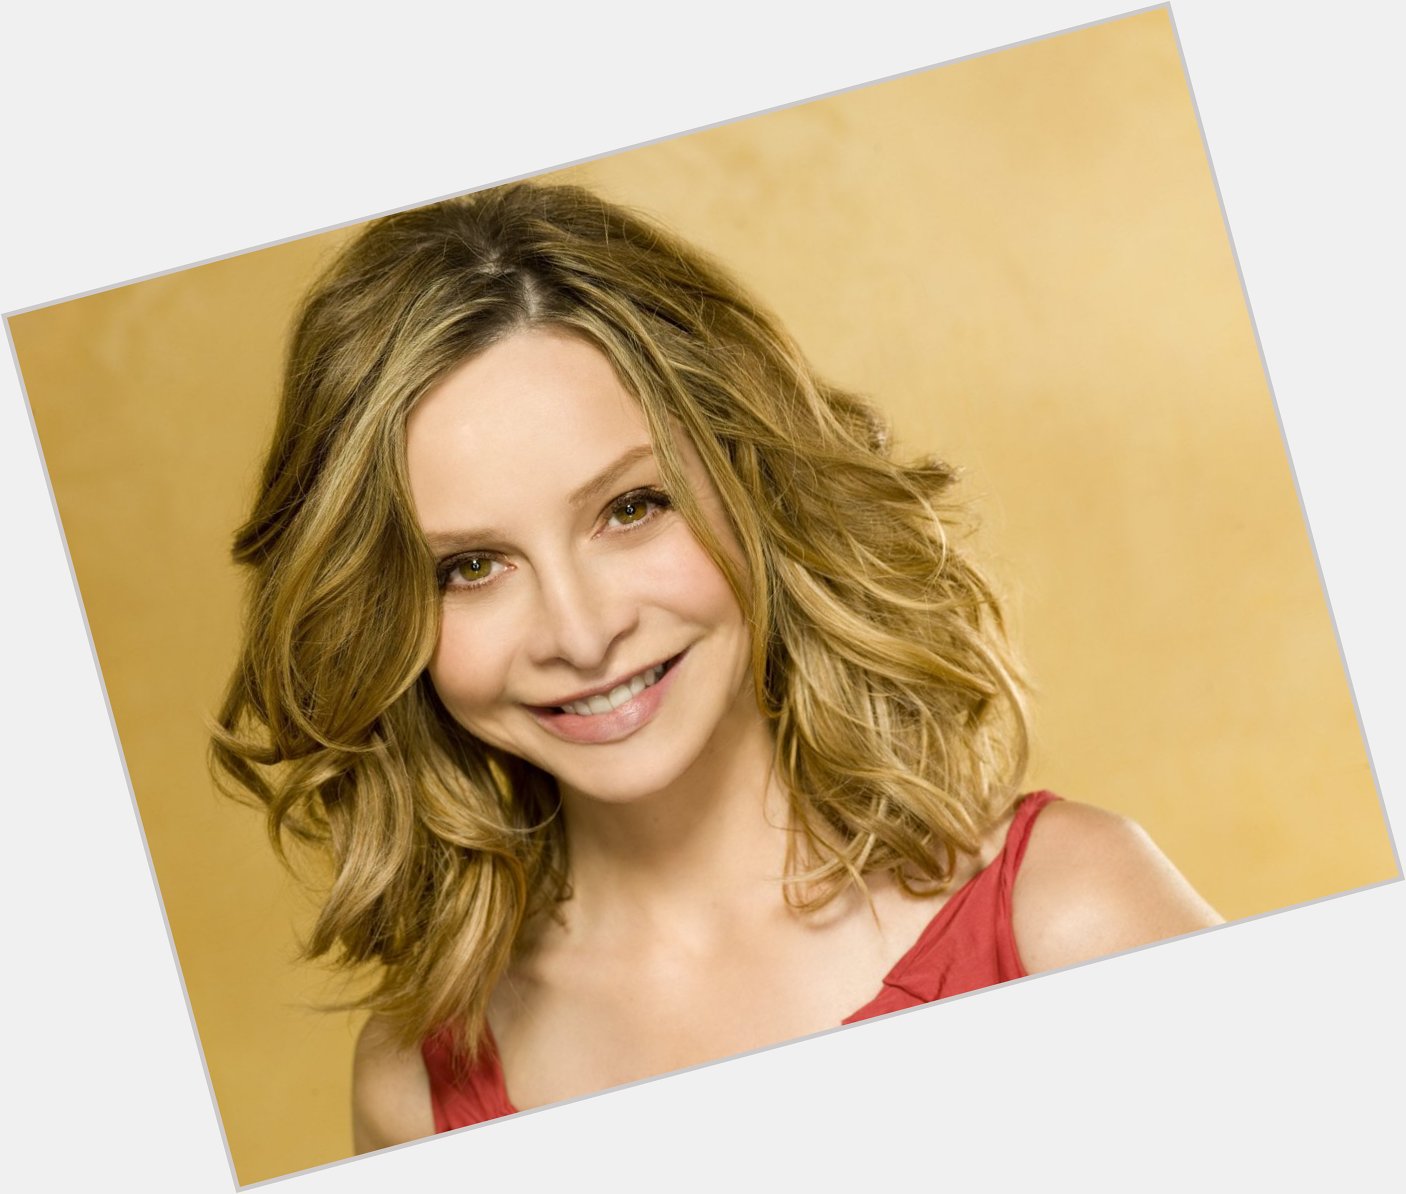  on with wishes Calista Flockhart a happy birthday! 